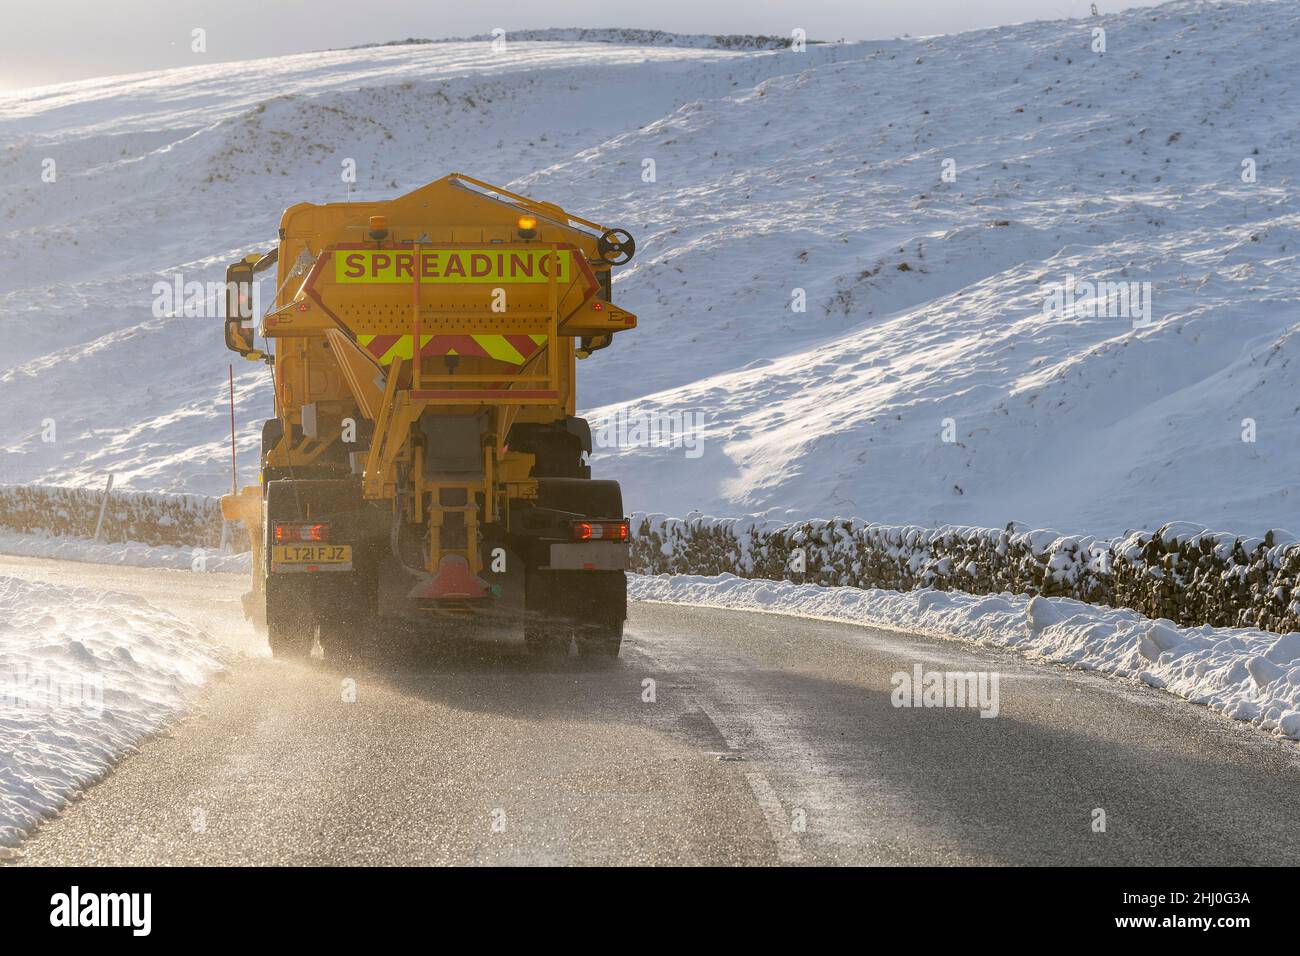 Council wagons gritting a rural road with salt after a snow storm, North Yorkshire, UK. Stock Photo